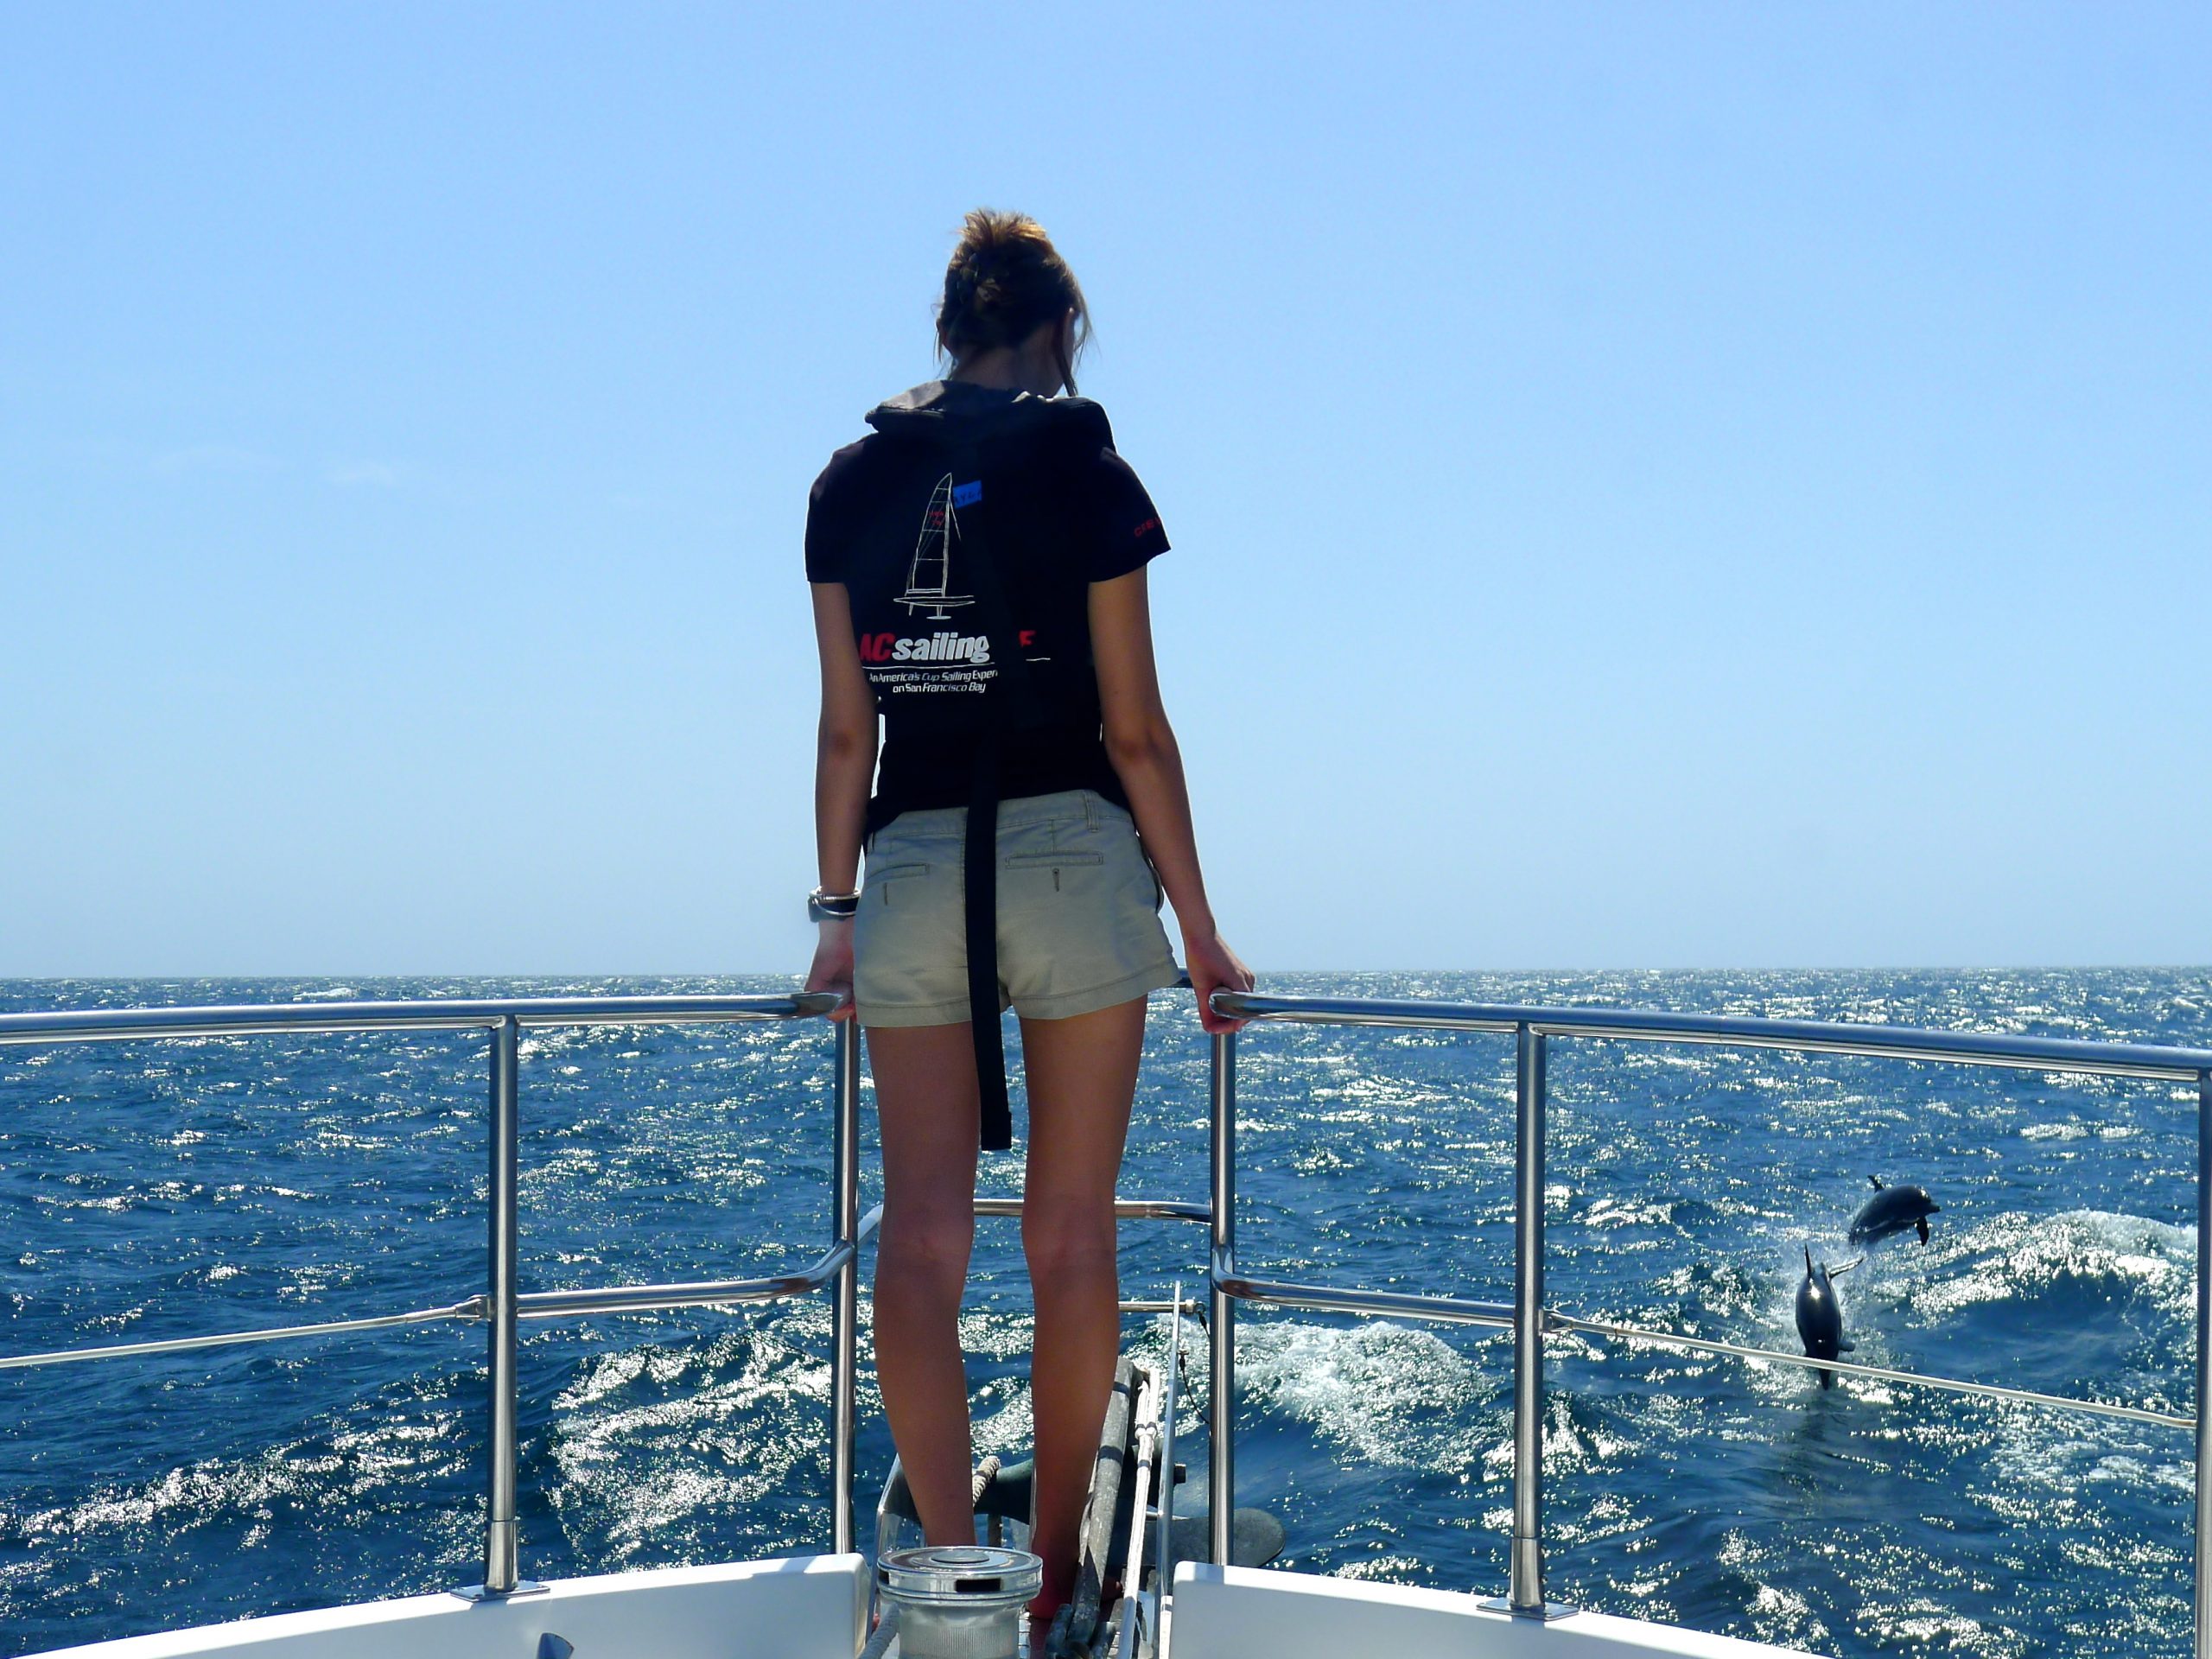 Ayla stands on a boat's deck with her back to the camera, looking out towards the ocean. The sun shines brightly in the sky, casting a warm glow on the woman and the surroundings. In the background, the ocean sparkles and two dolphins can be seen leaping in and out of the water. The woman is wearing shorts and appears relaxed and content as she enjoys the beautiful scene.